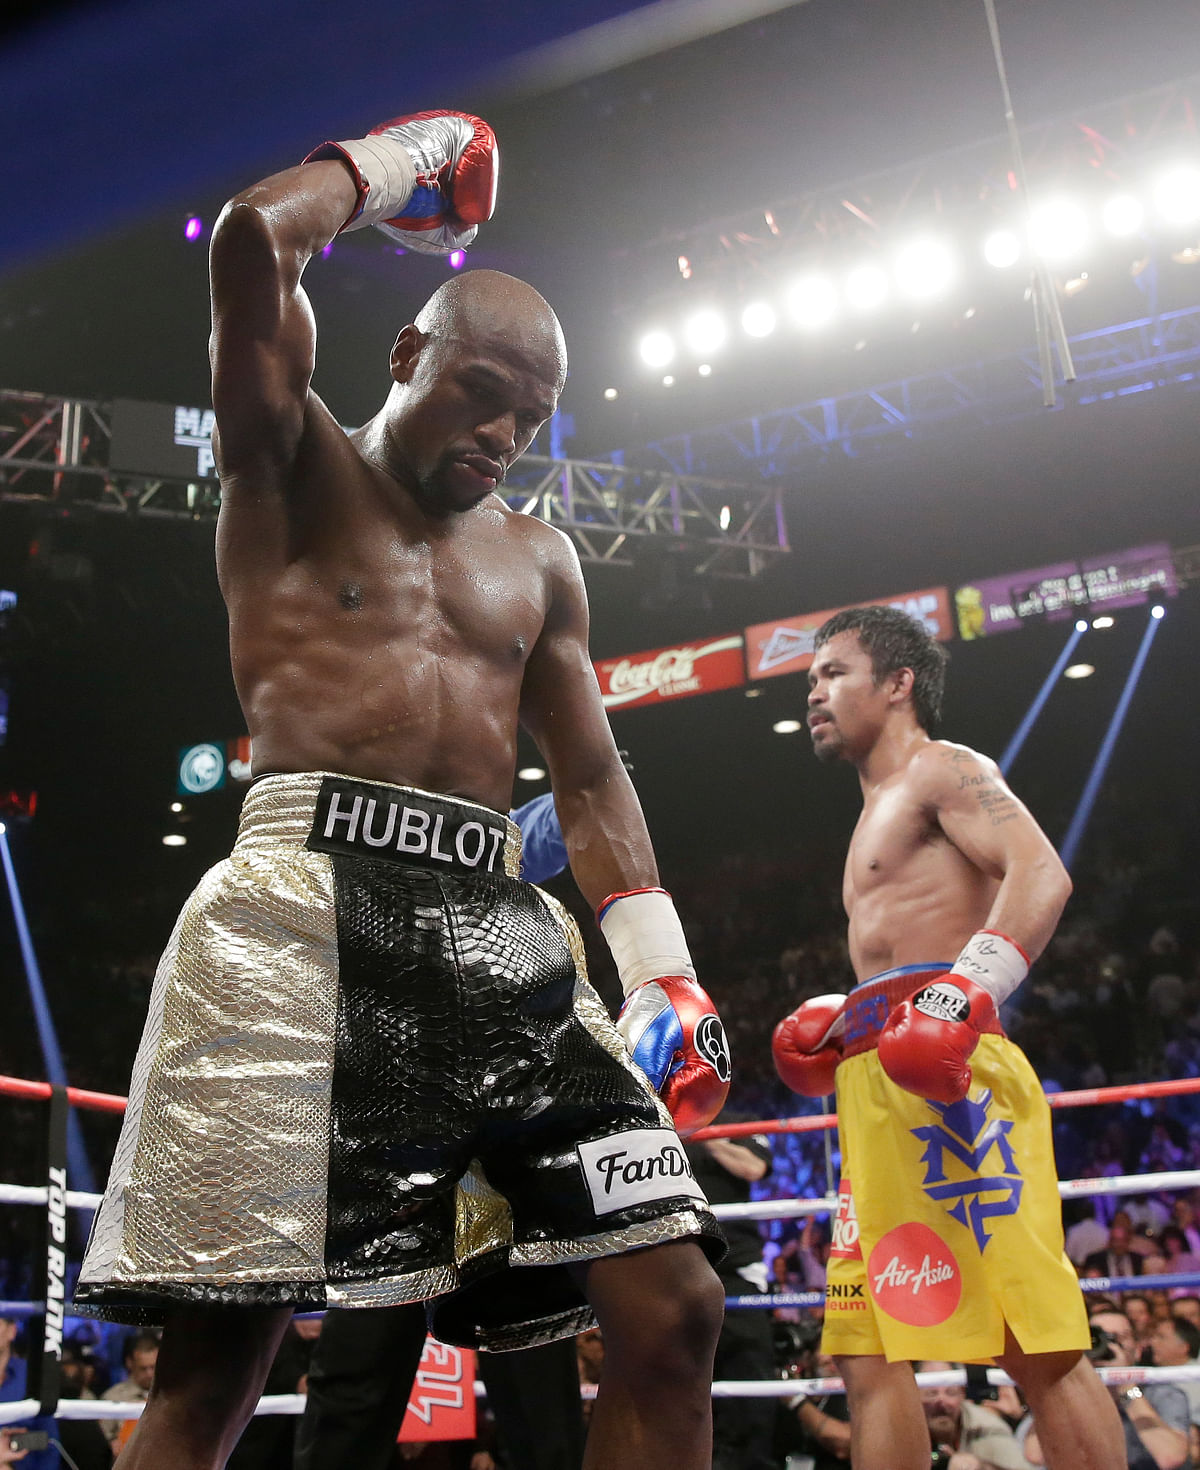 Mayweather reacts to Pacquiao’s claims that he fought him with an injured shoulder. 